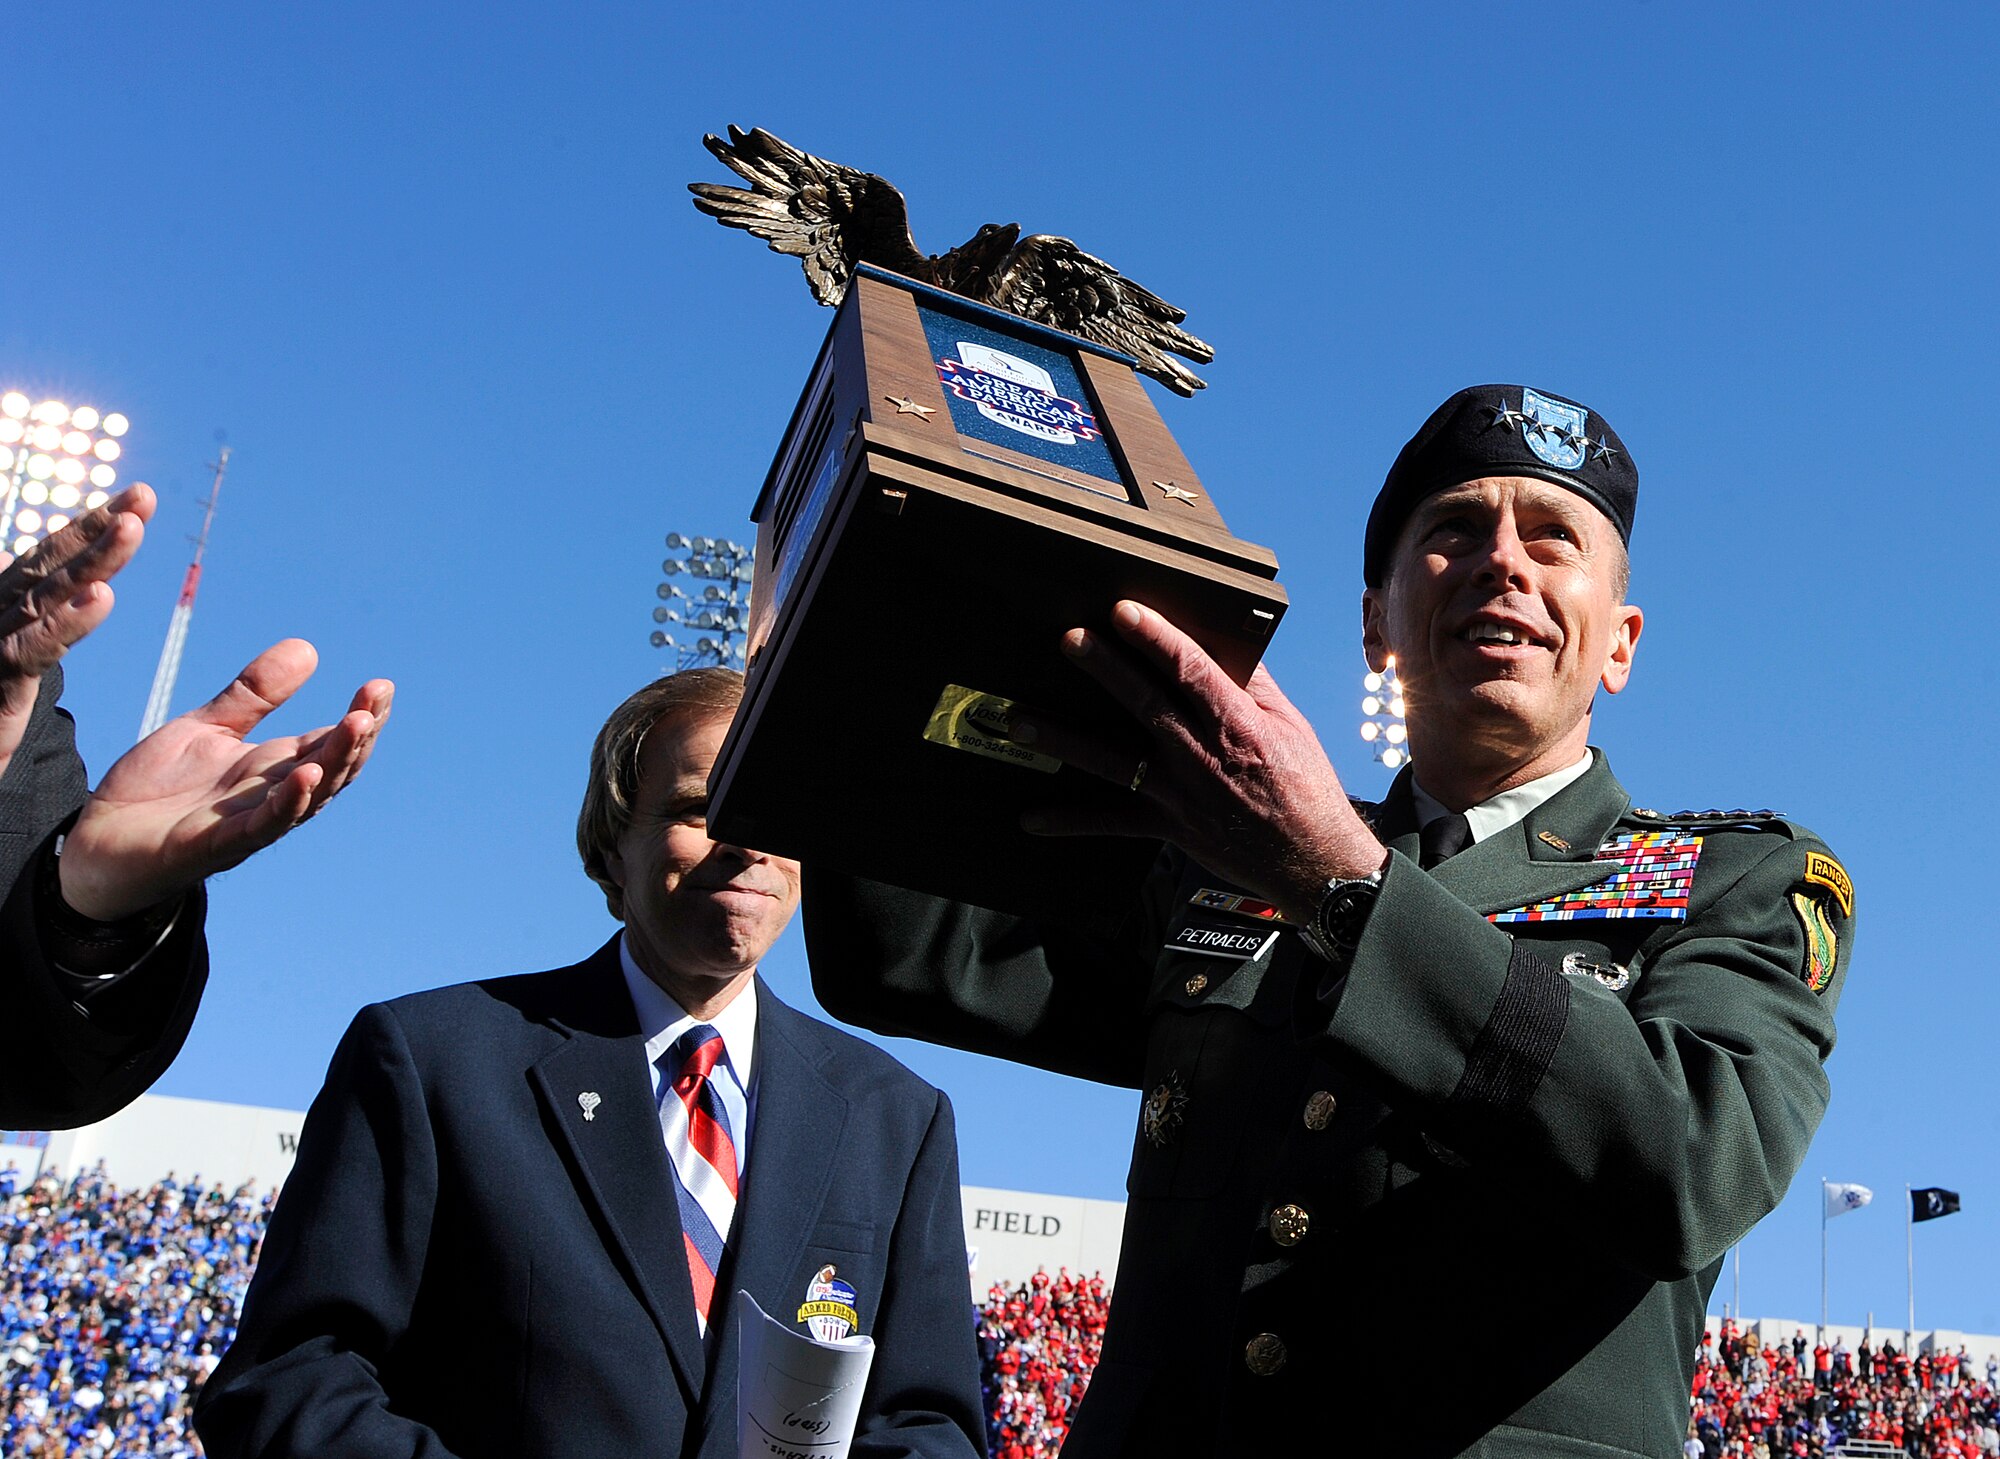 Gen. David Petraeus, U.S. Central Command commander, is honored with the Armed Forces Insurance Great American Patriot Award during half time of the Bell Helicopter Armed Forces Bowl game between the U.S. Air Force Academy and the University of Houston, Dec. 31 at Amon G. Carter Stadium in Fort Worth, Texas. (U.S. Air Force photo/Staff Sgt. Bennie J. Davis III)